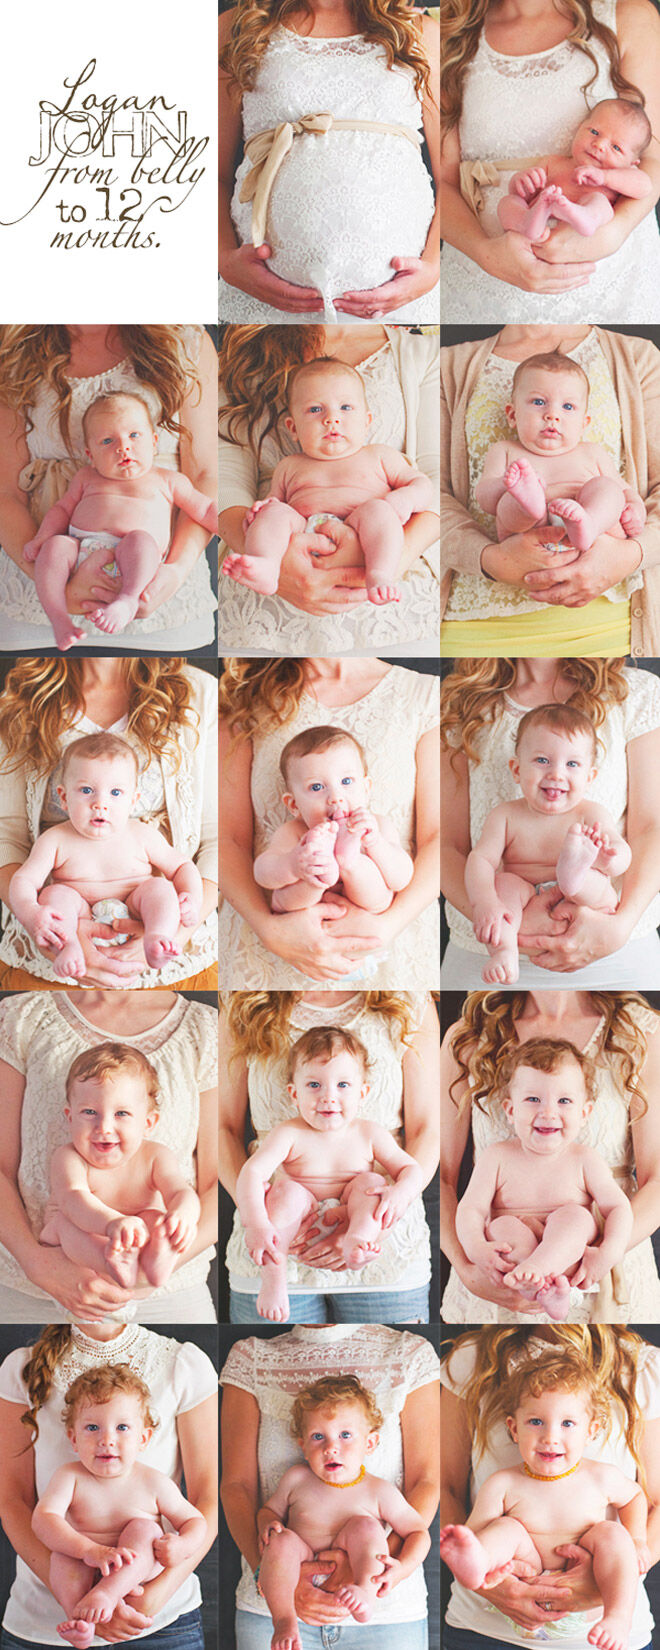 13 monthly baby photo ideas: holding baby in arms